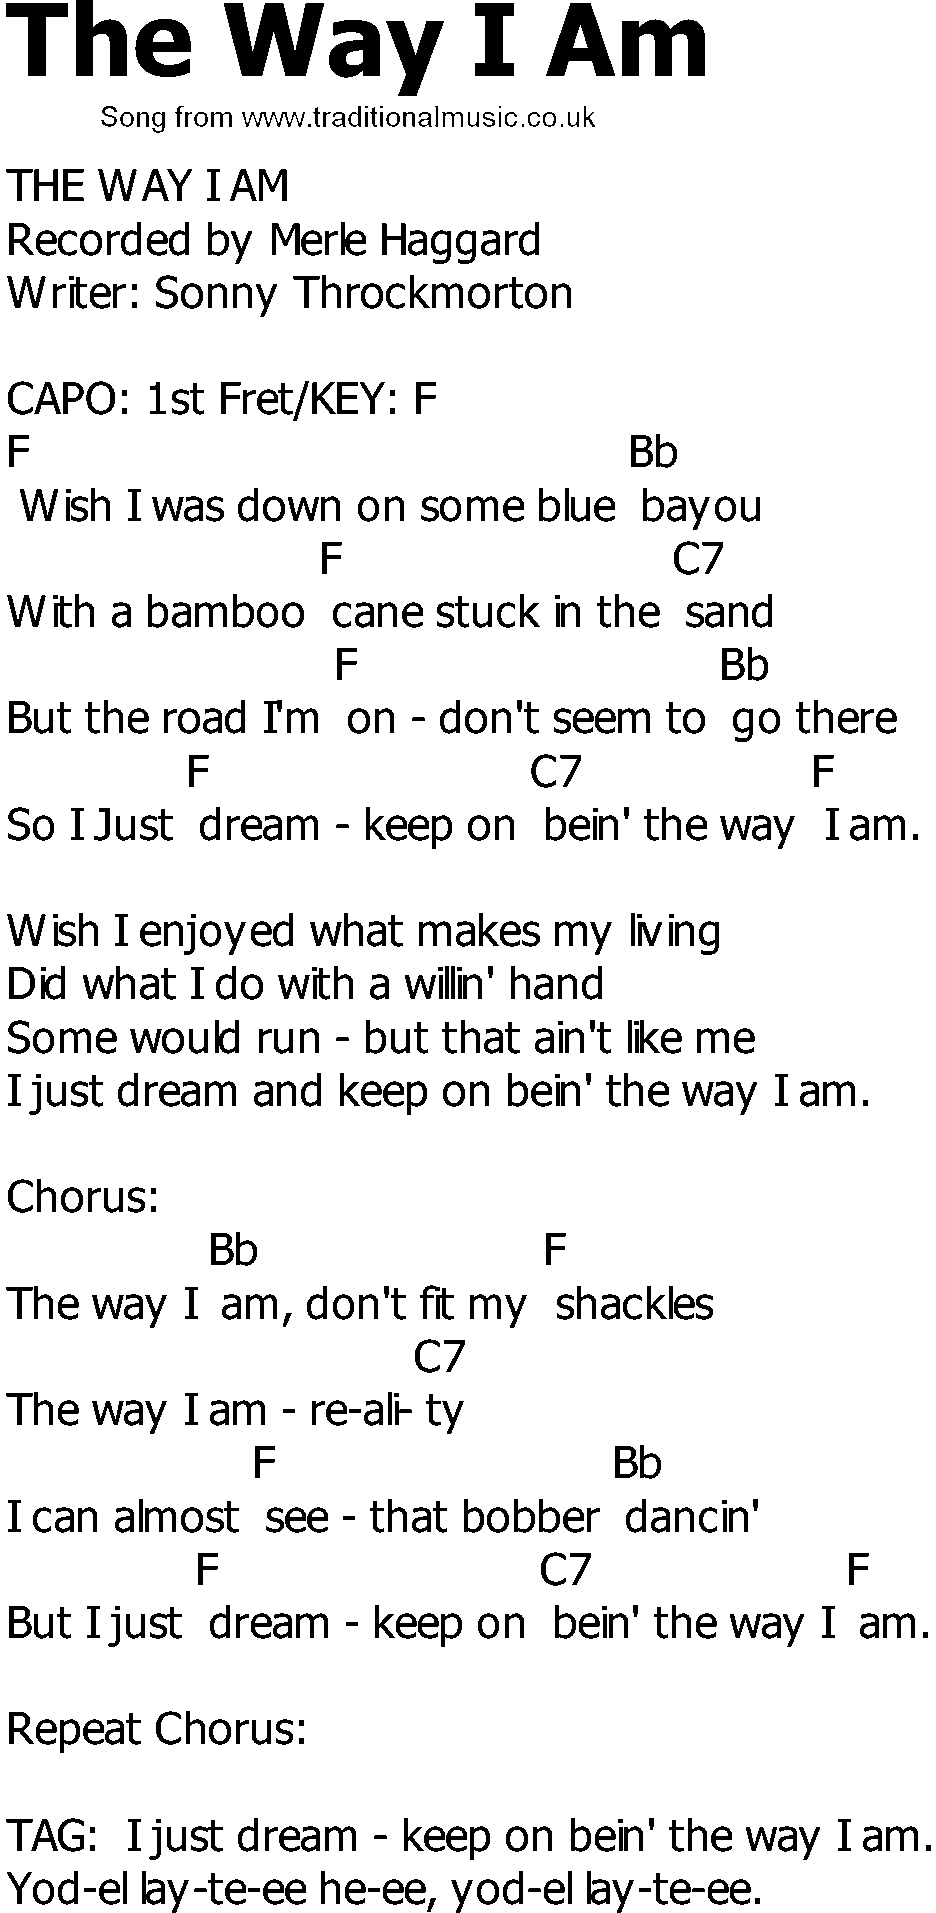 Old Country song lyrics with chords - The Way I Am